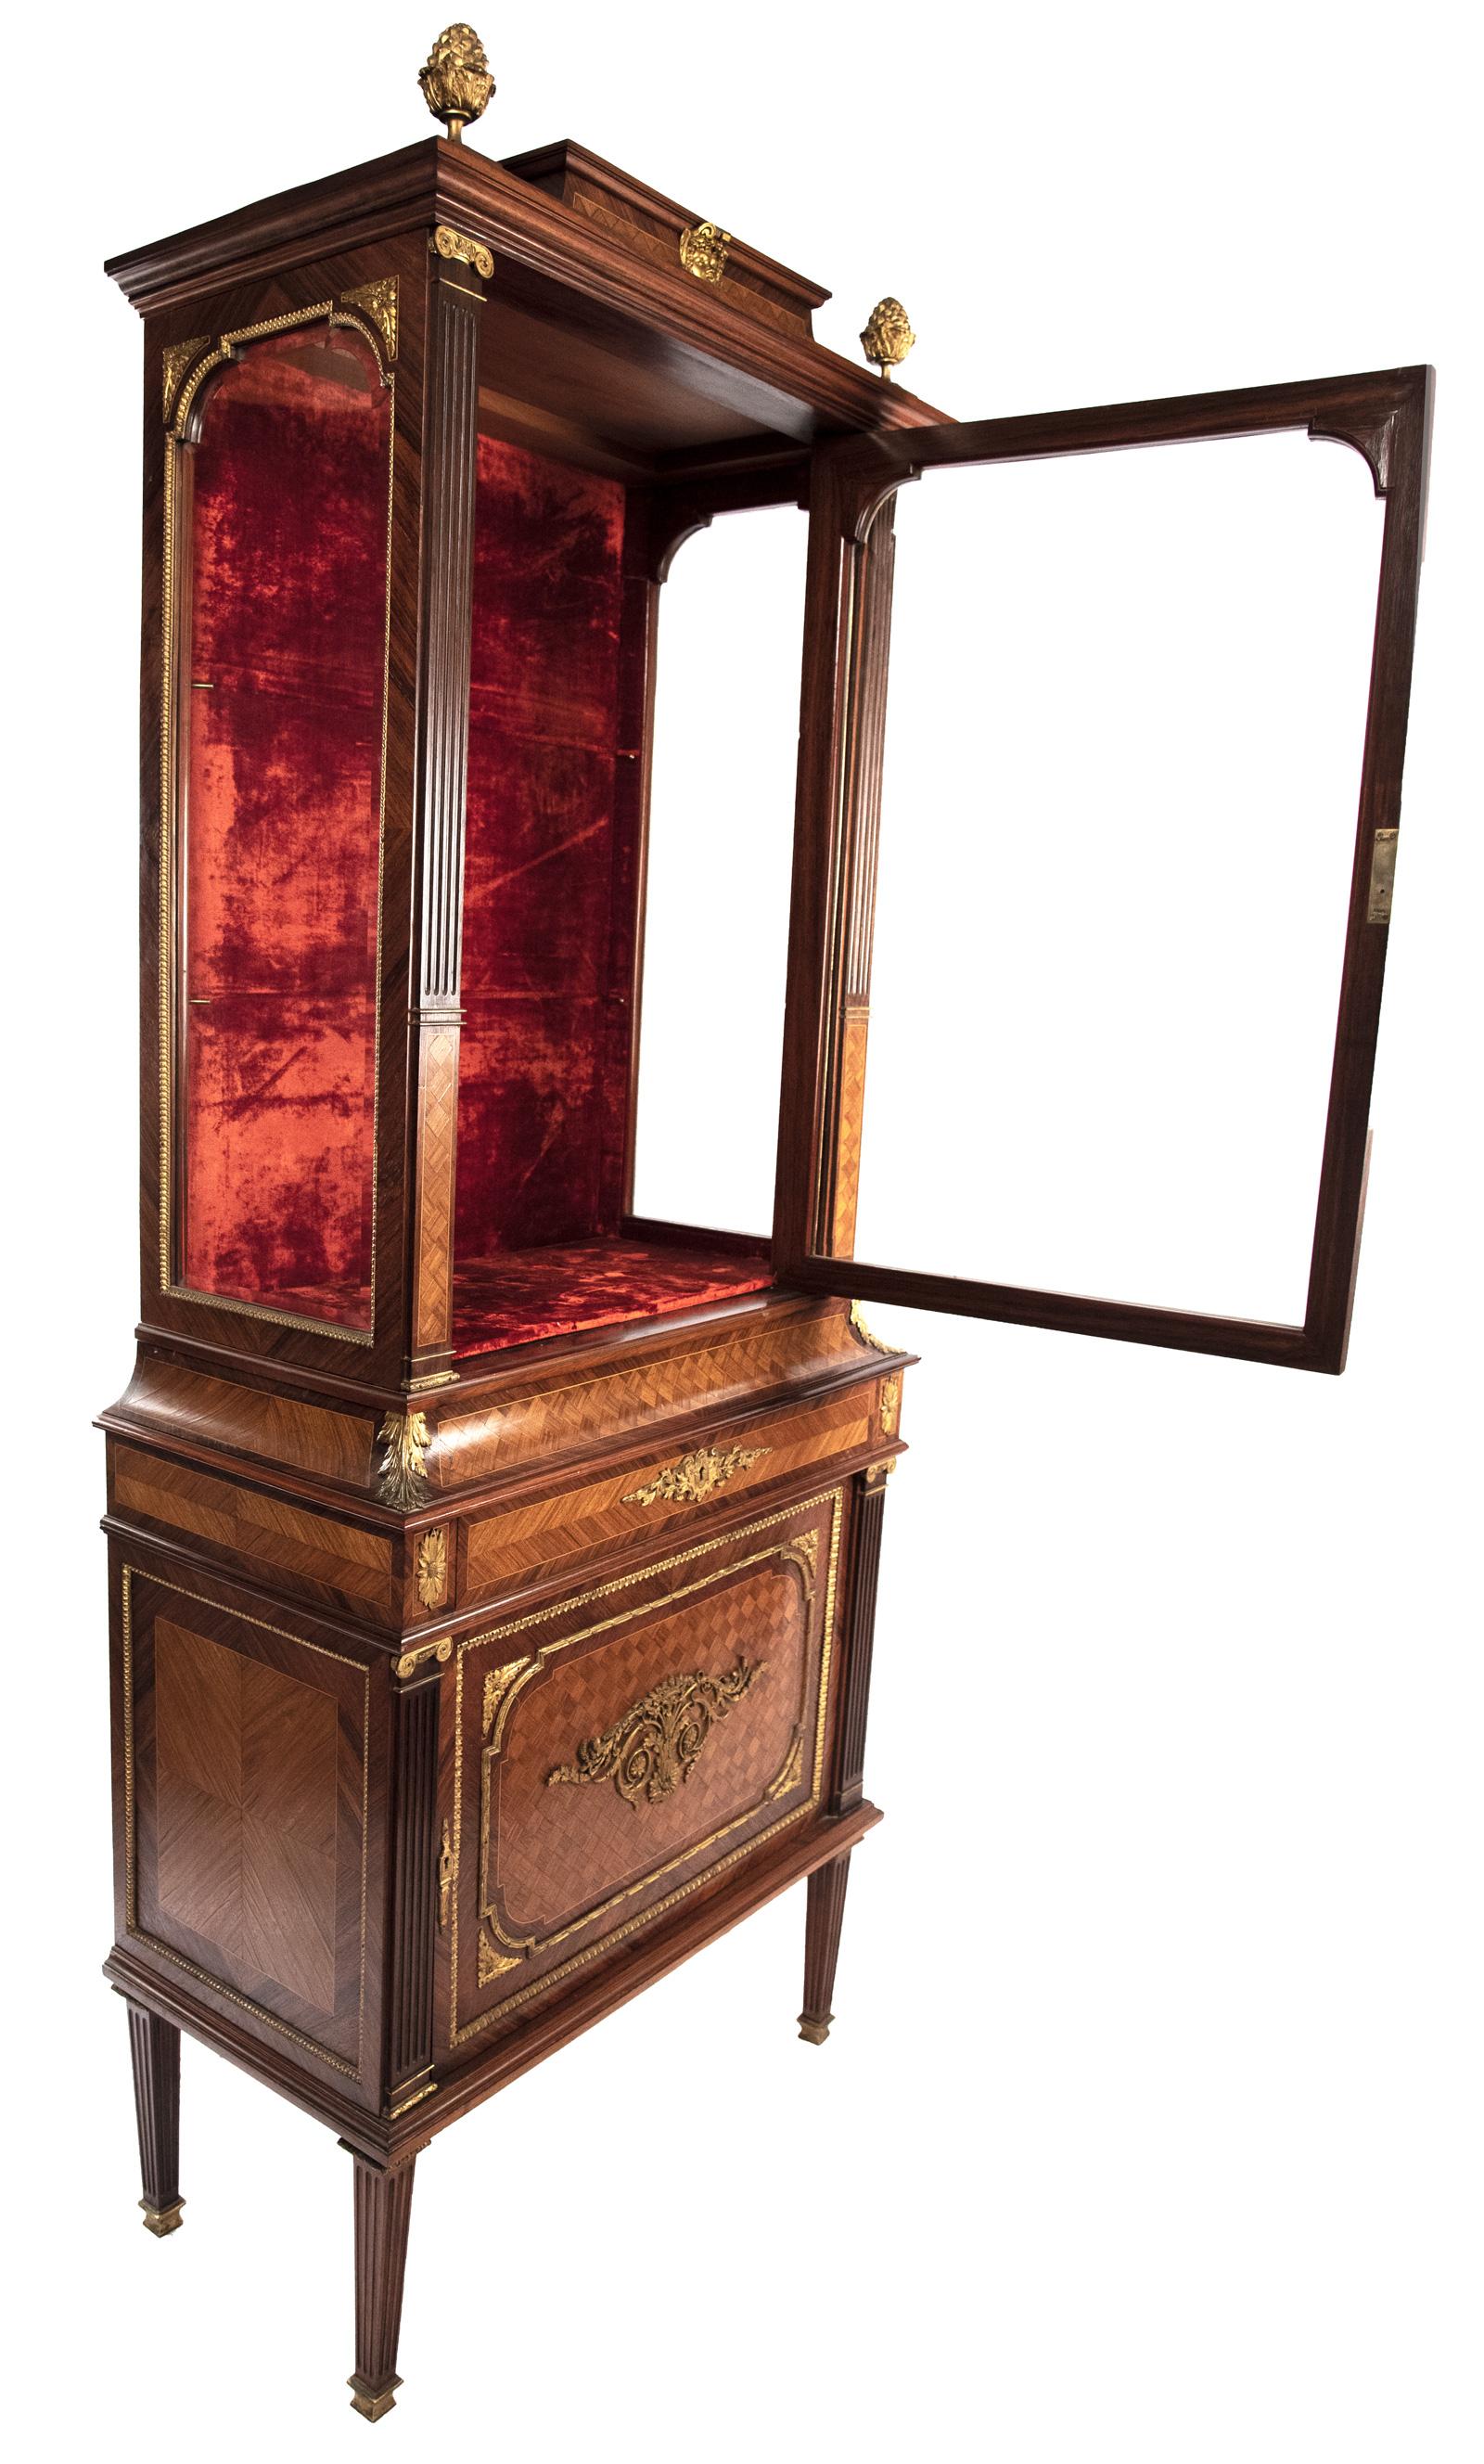 19th Century French Louis XVI Style Vitrine by A. Bastet, Lyon In Good Condition For Sale In Salt Lake City, UT